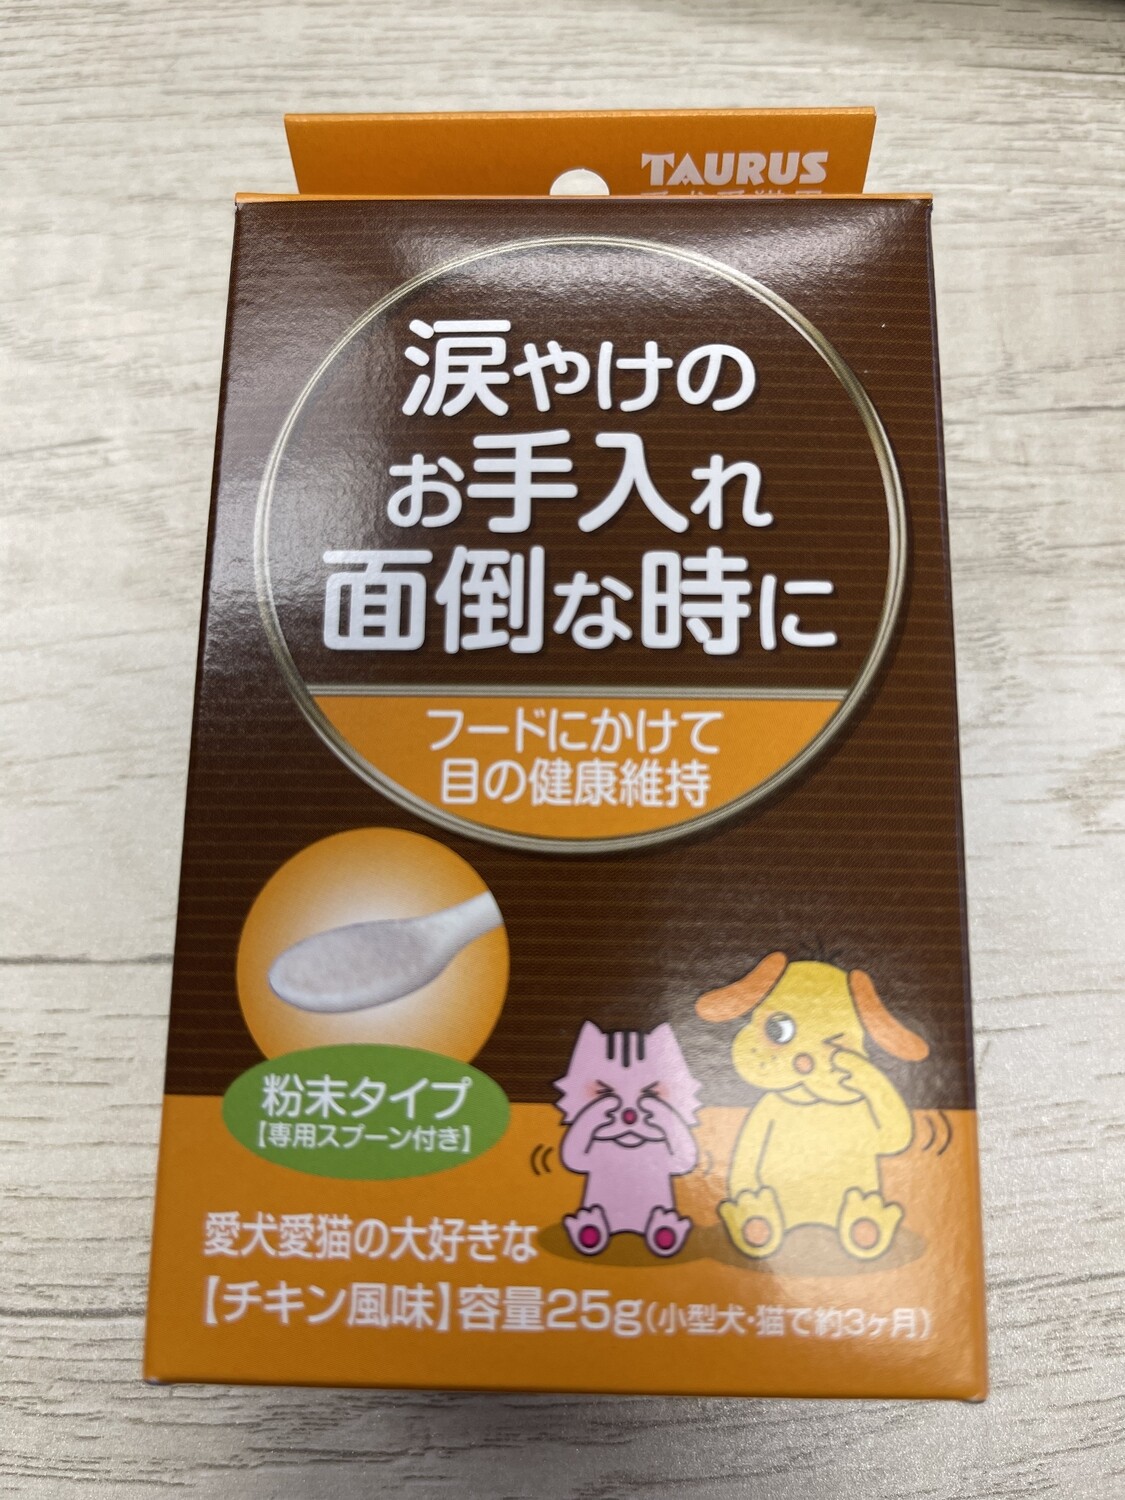 TAURUS tear stains powder for dogs and cats - 泪痕粉 猫狗通用